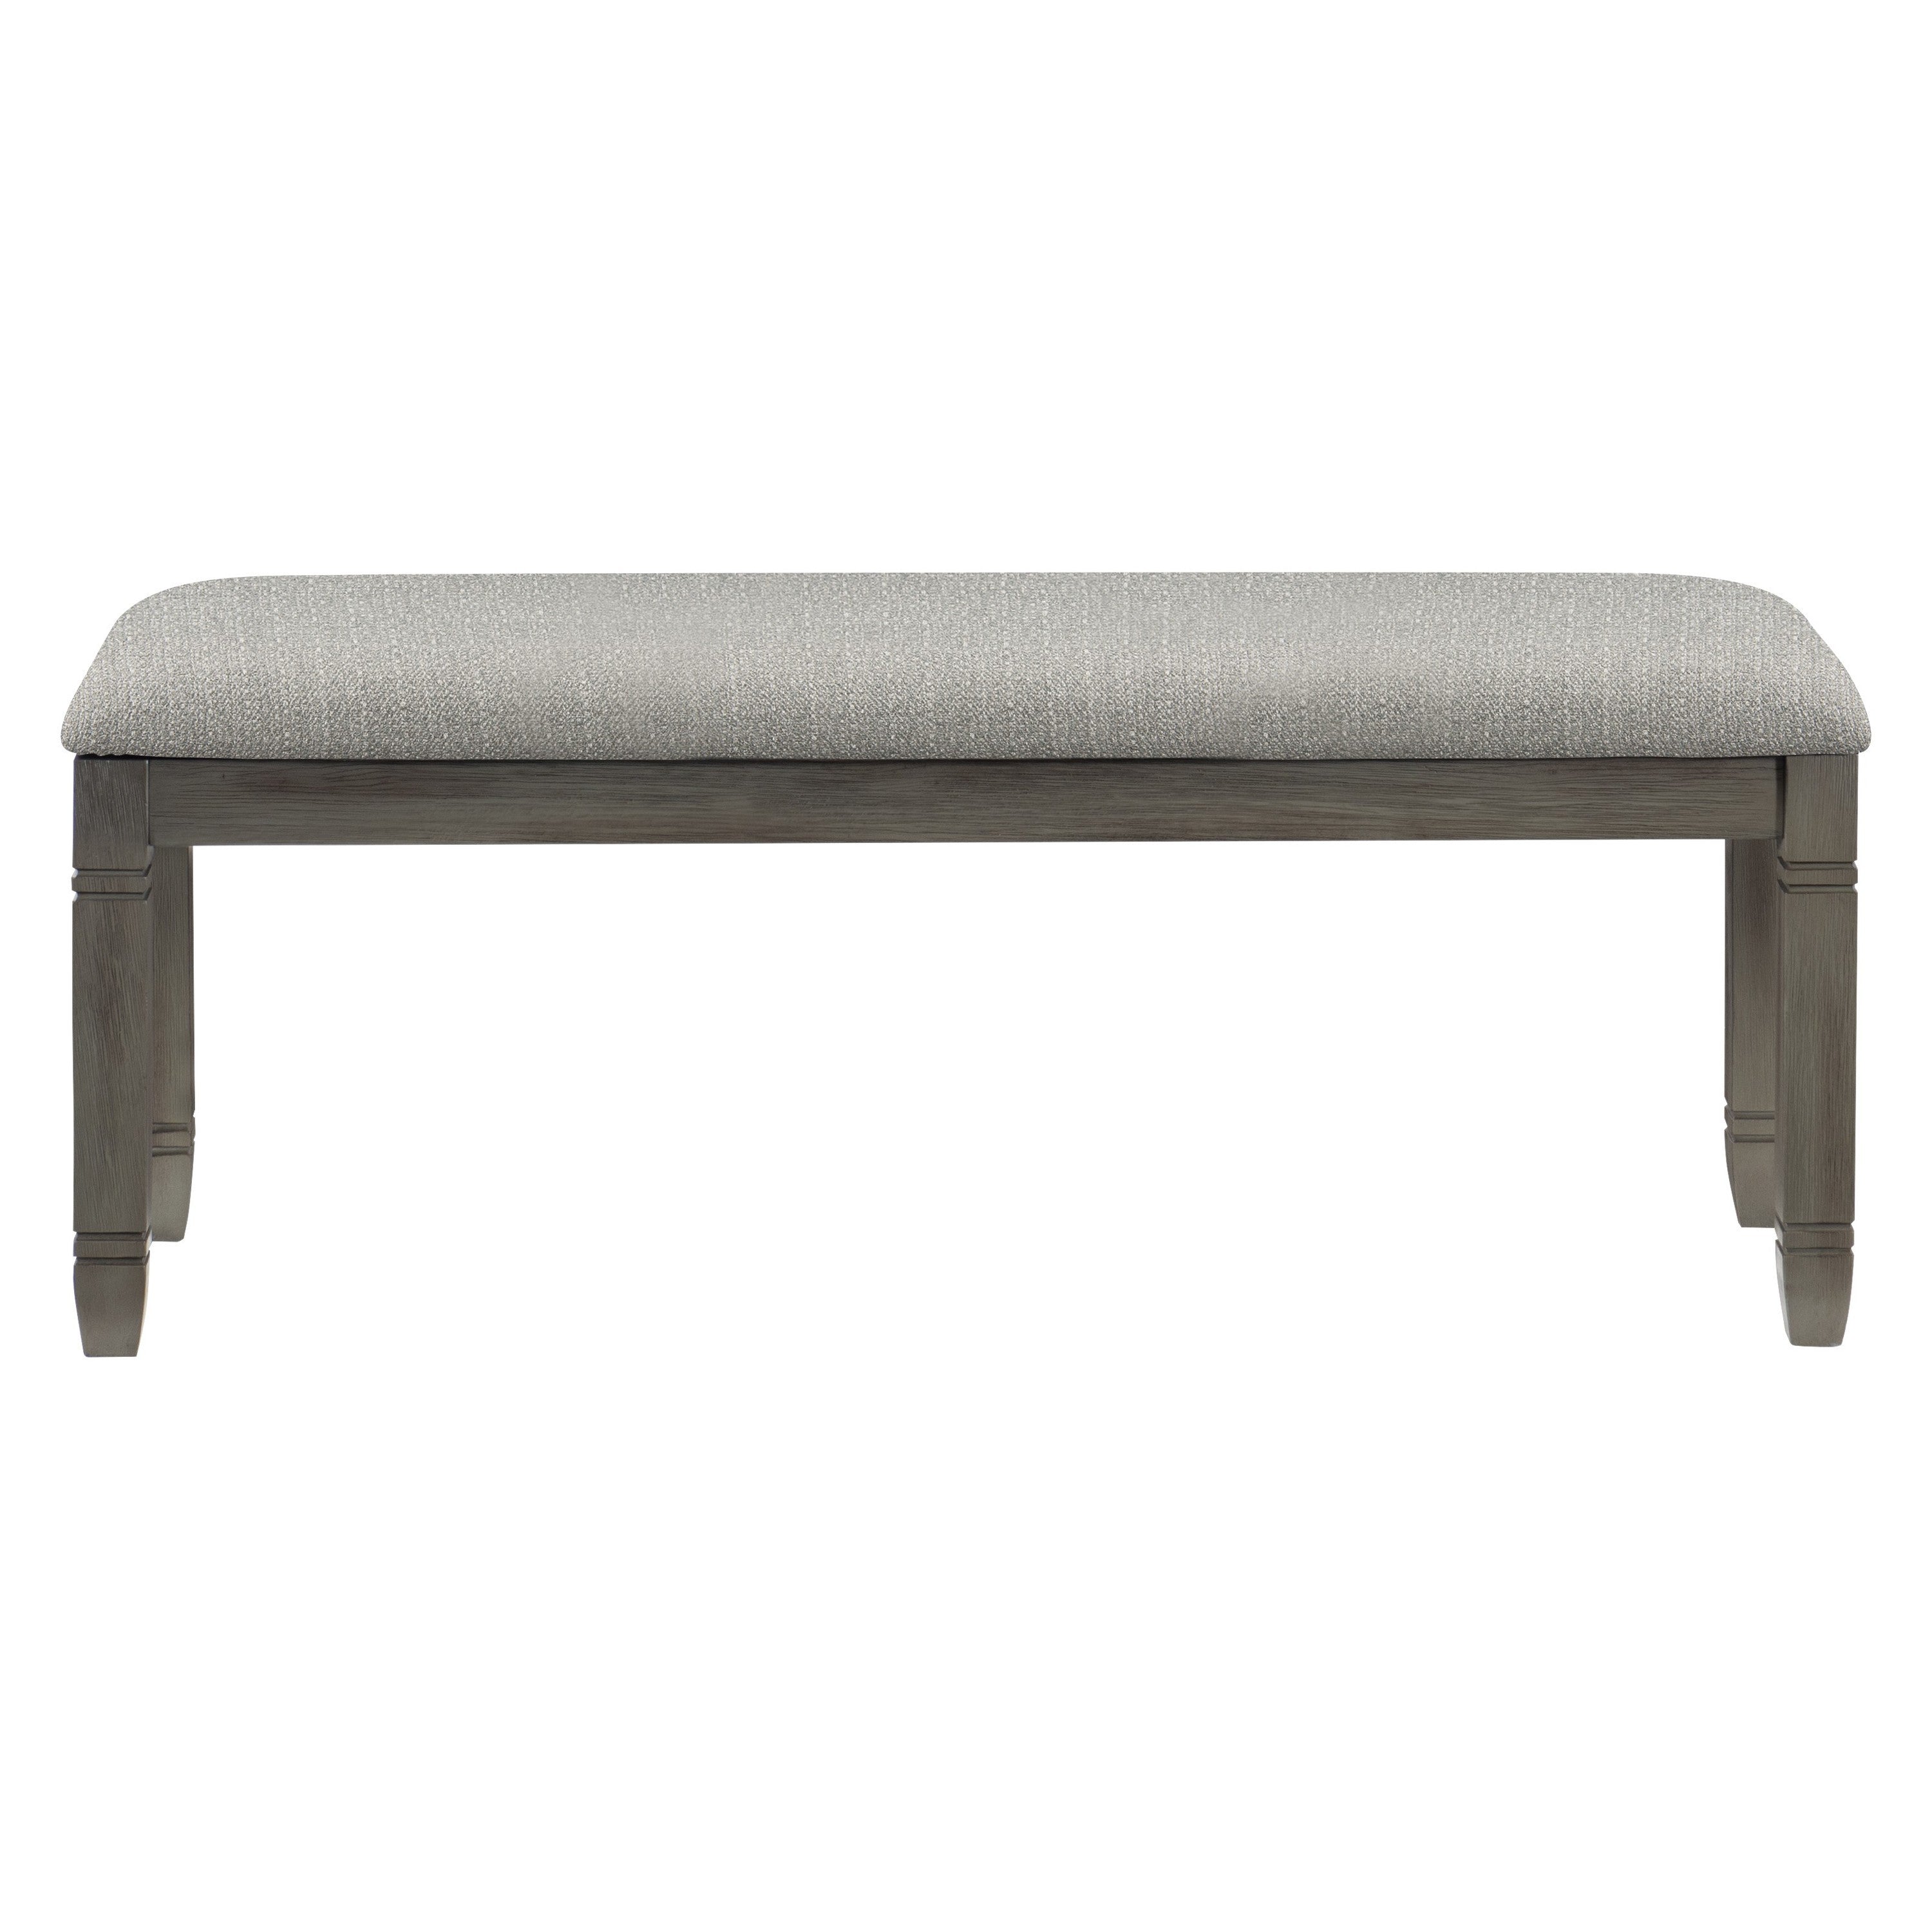 Wood Frame Dining Bench - Antique Gray Finish